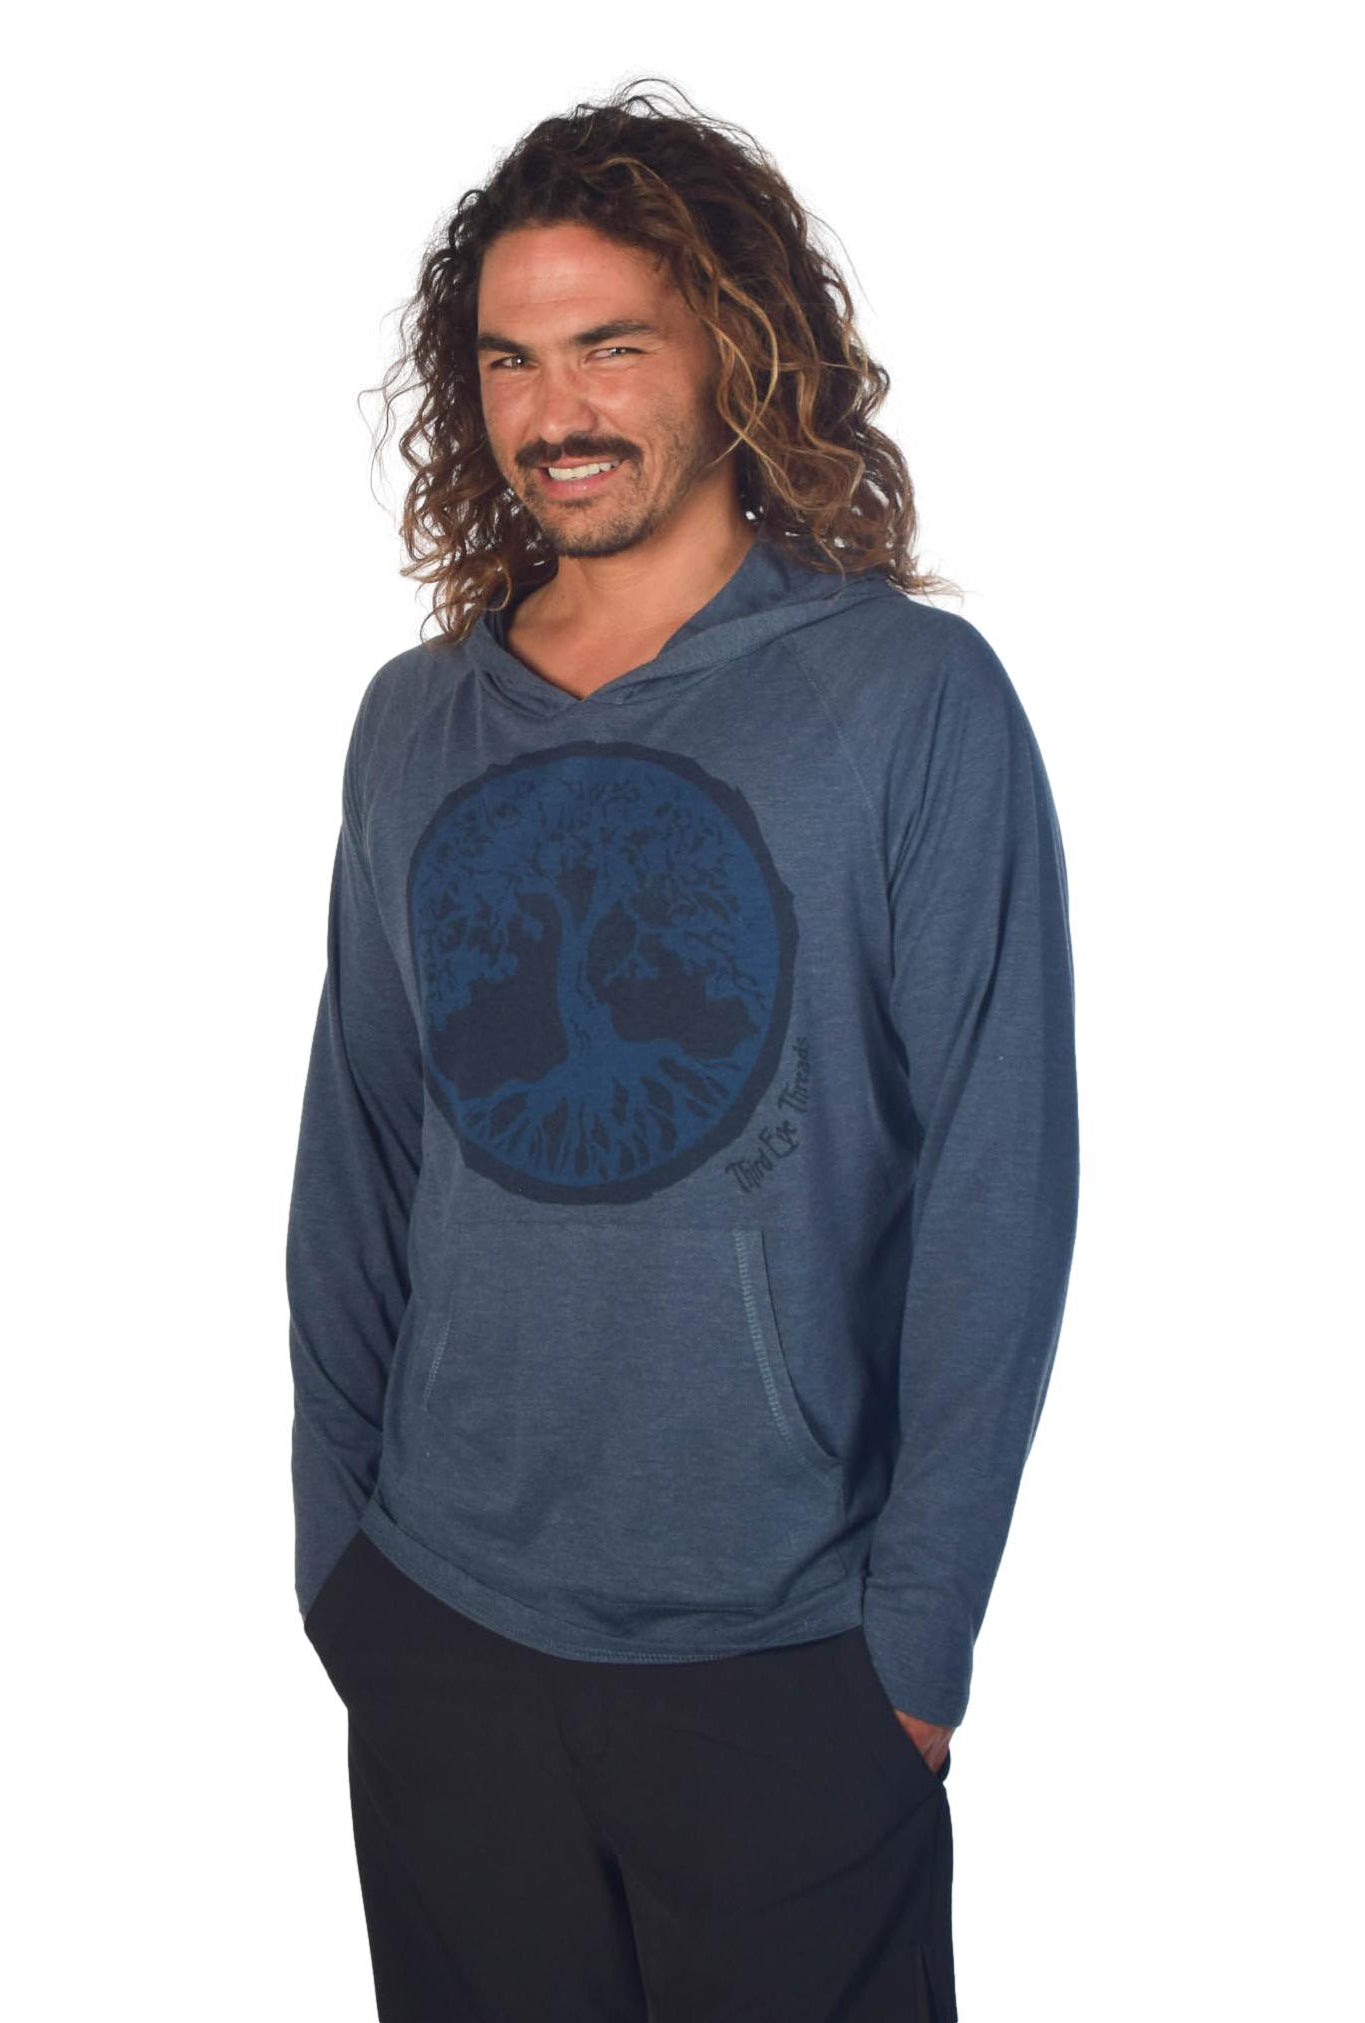 Unisex Tree of LIfe On Pull over Hoodie - Third Eye Threads